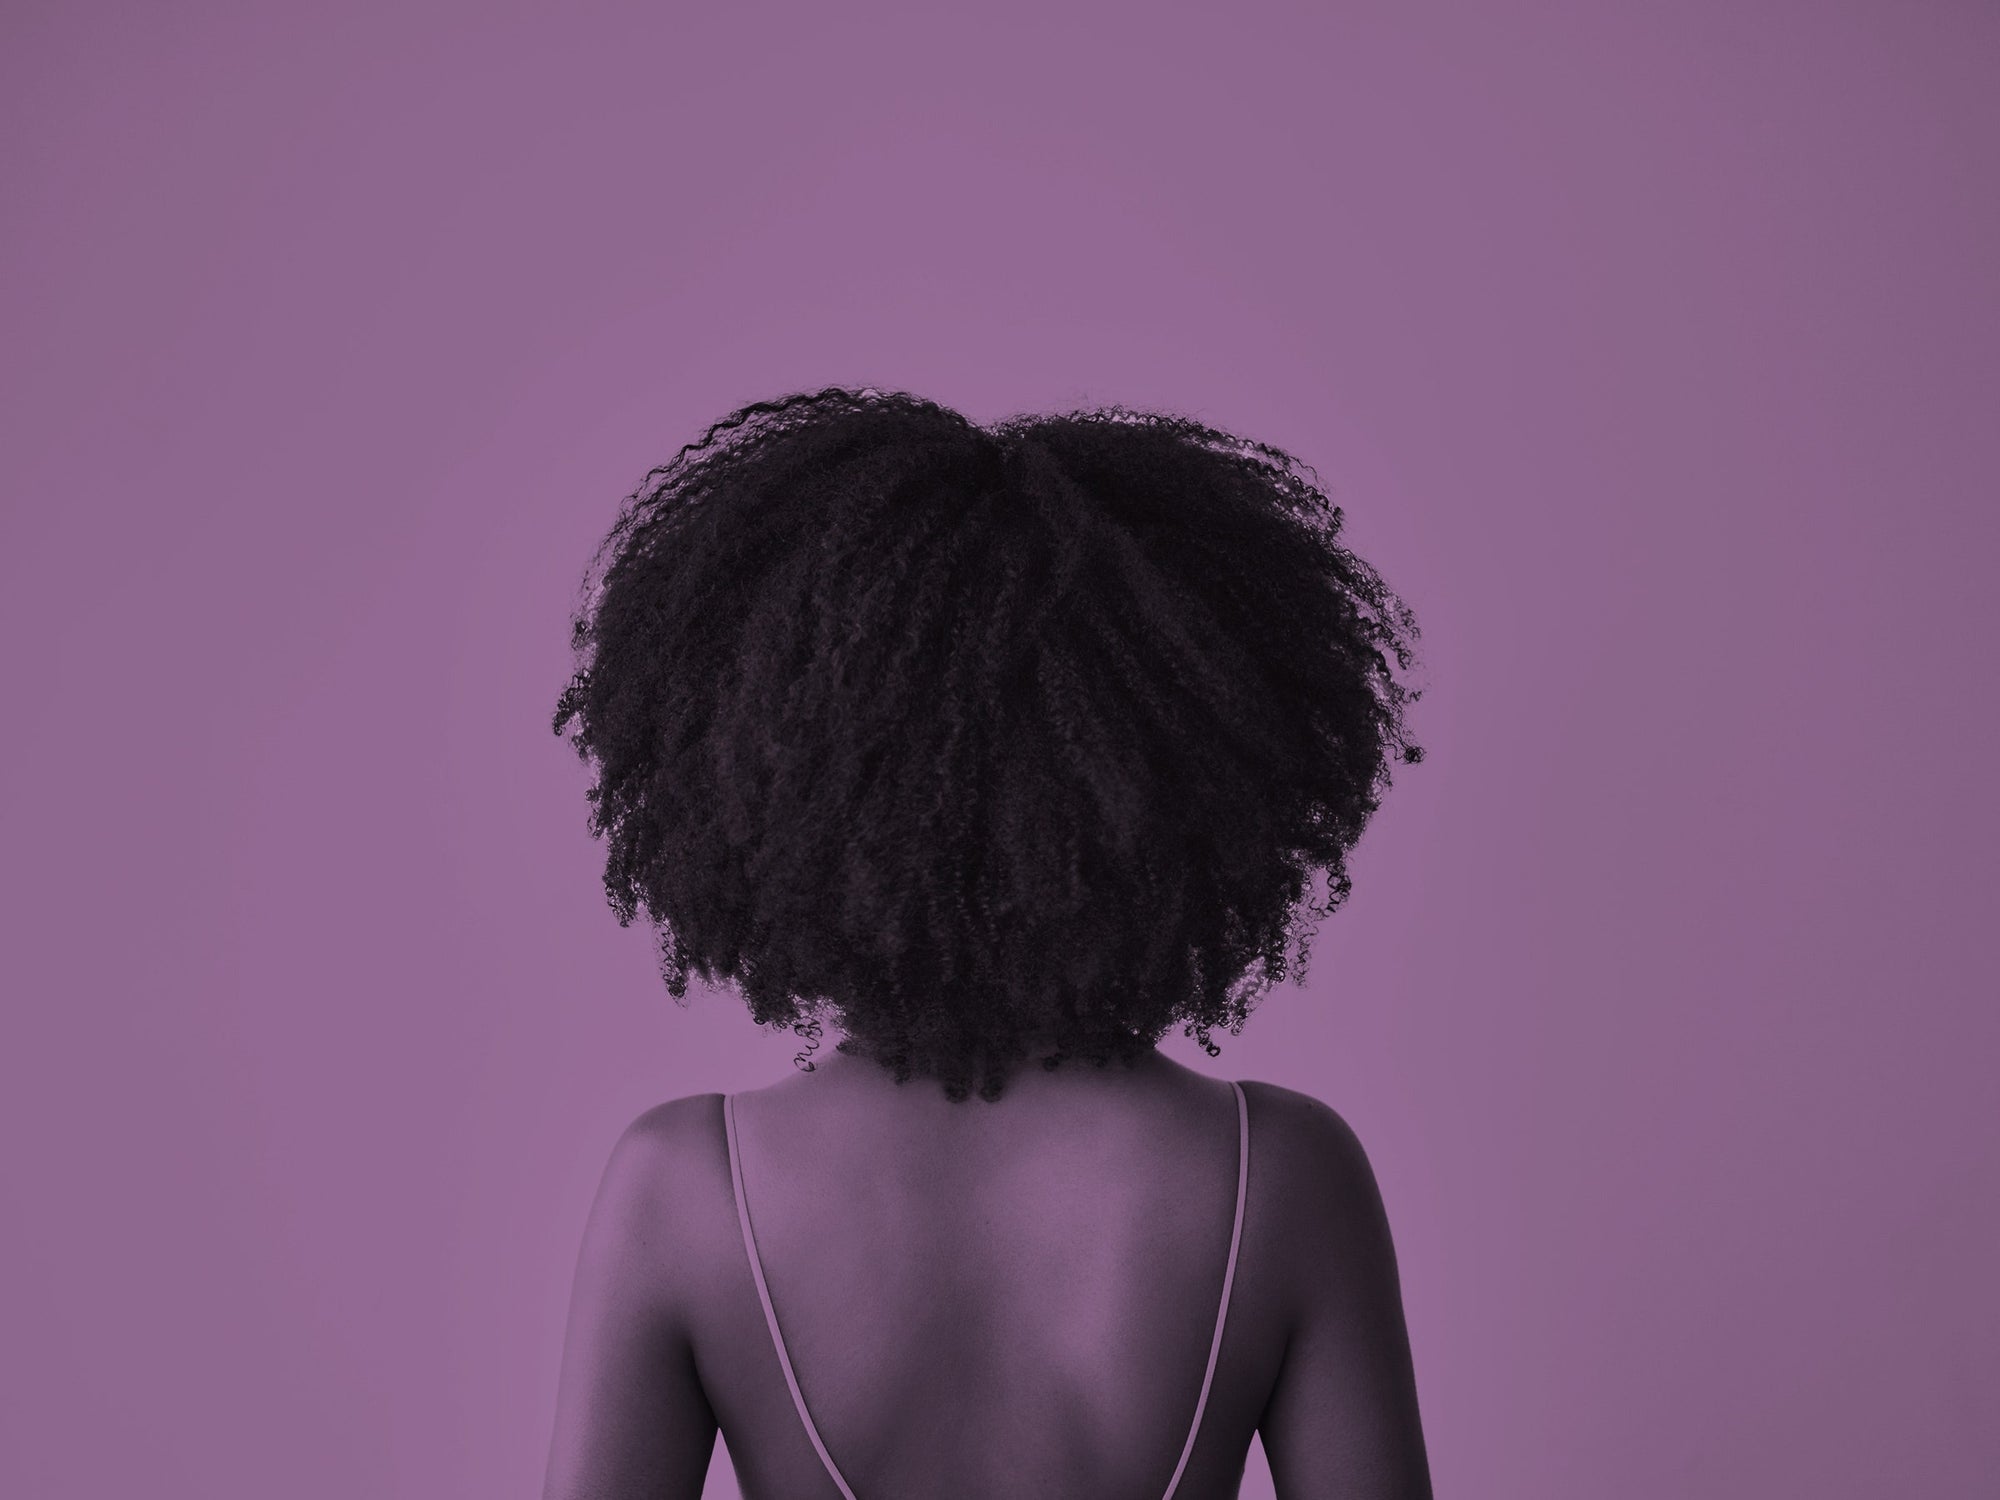 An African-American girl with voluminous, thick hair that hangs stands with her back towards us. The photo has a purple hue.